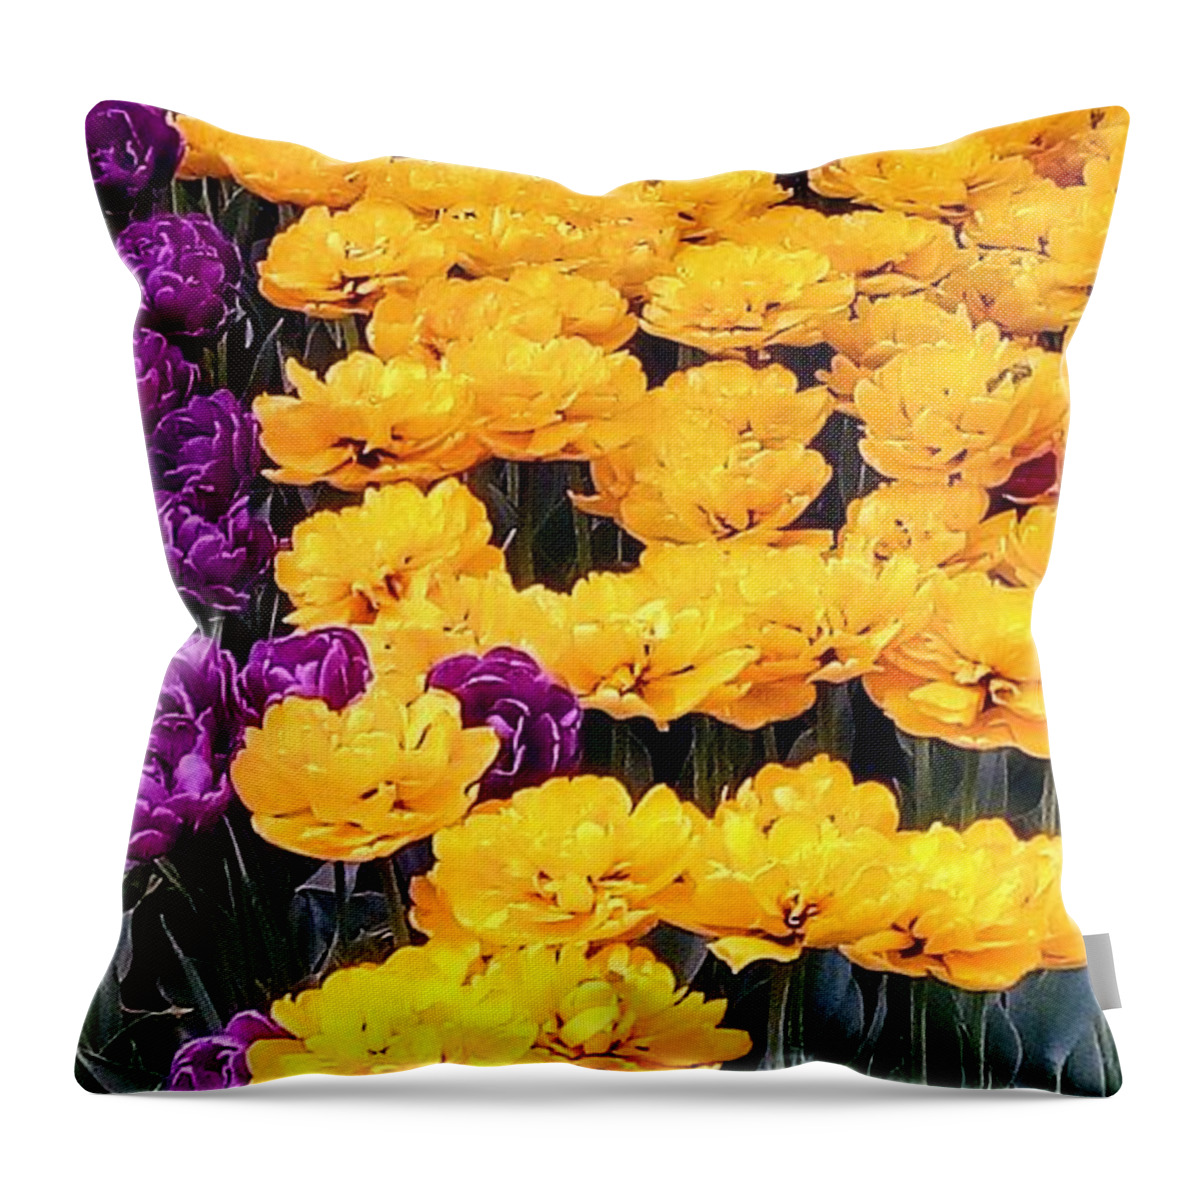 Yellow Throw Pillow featuring the photograph Yellow Violets by Oleg Zavarzin